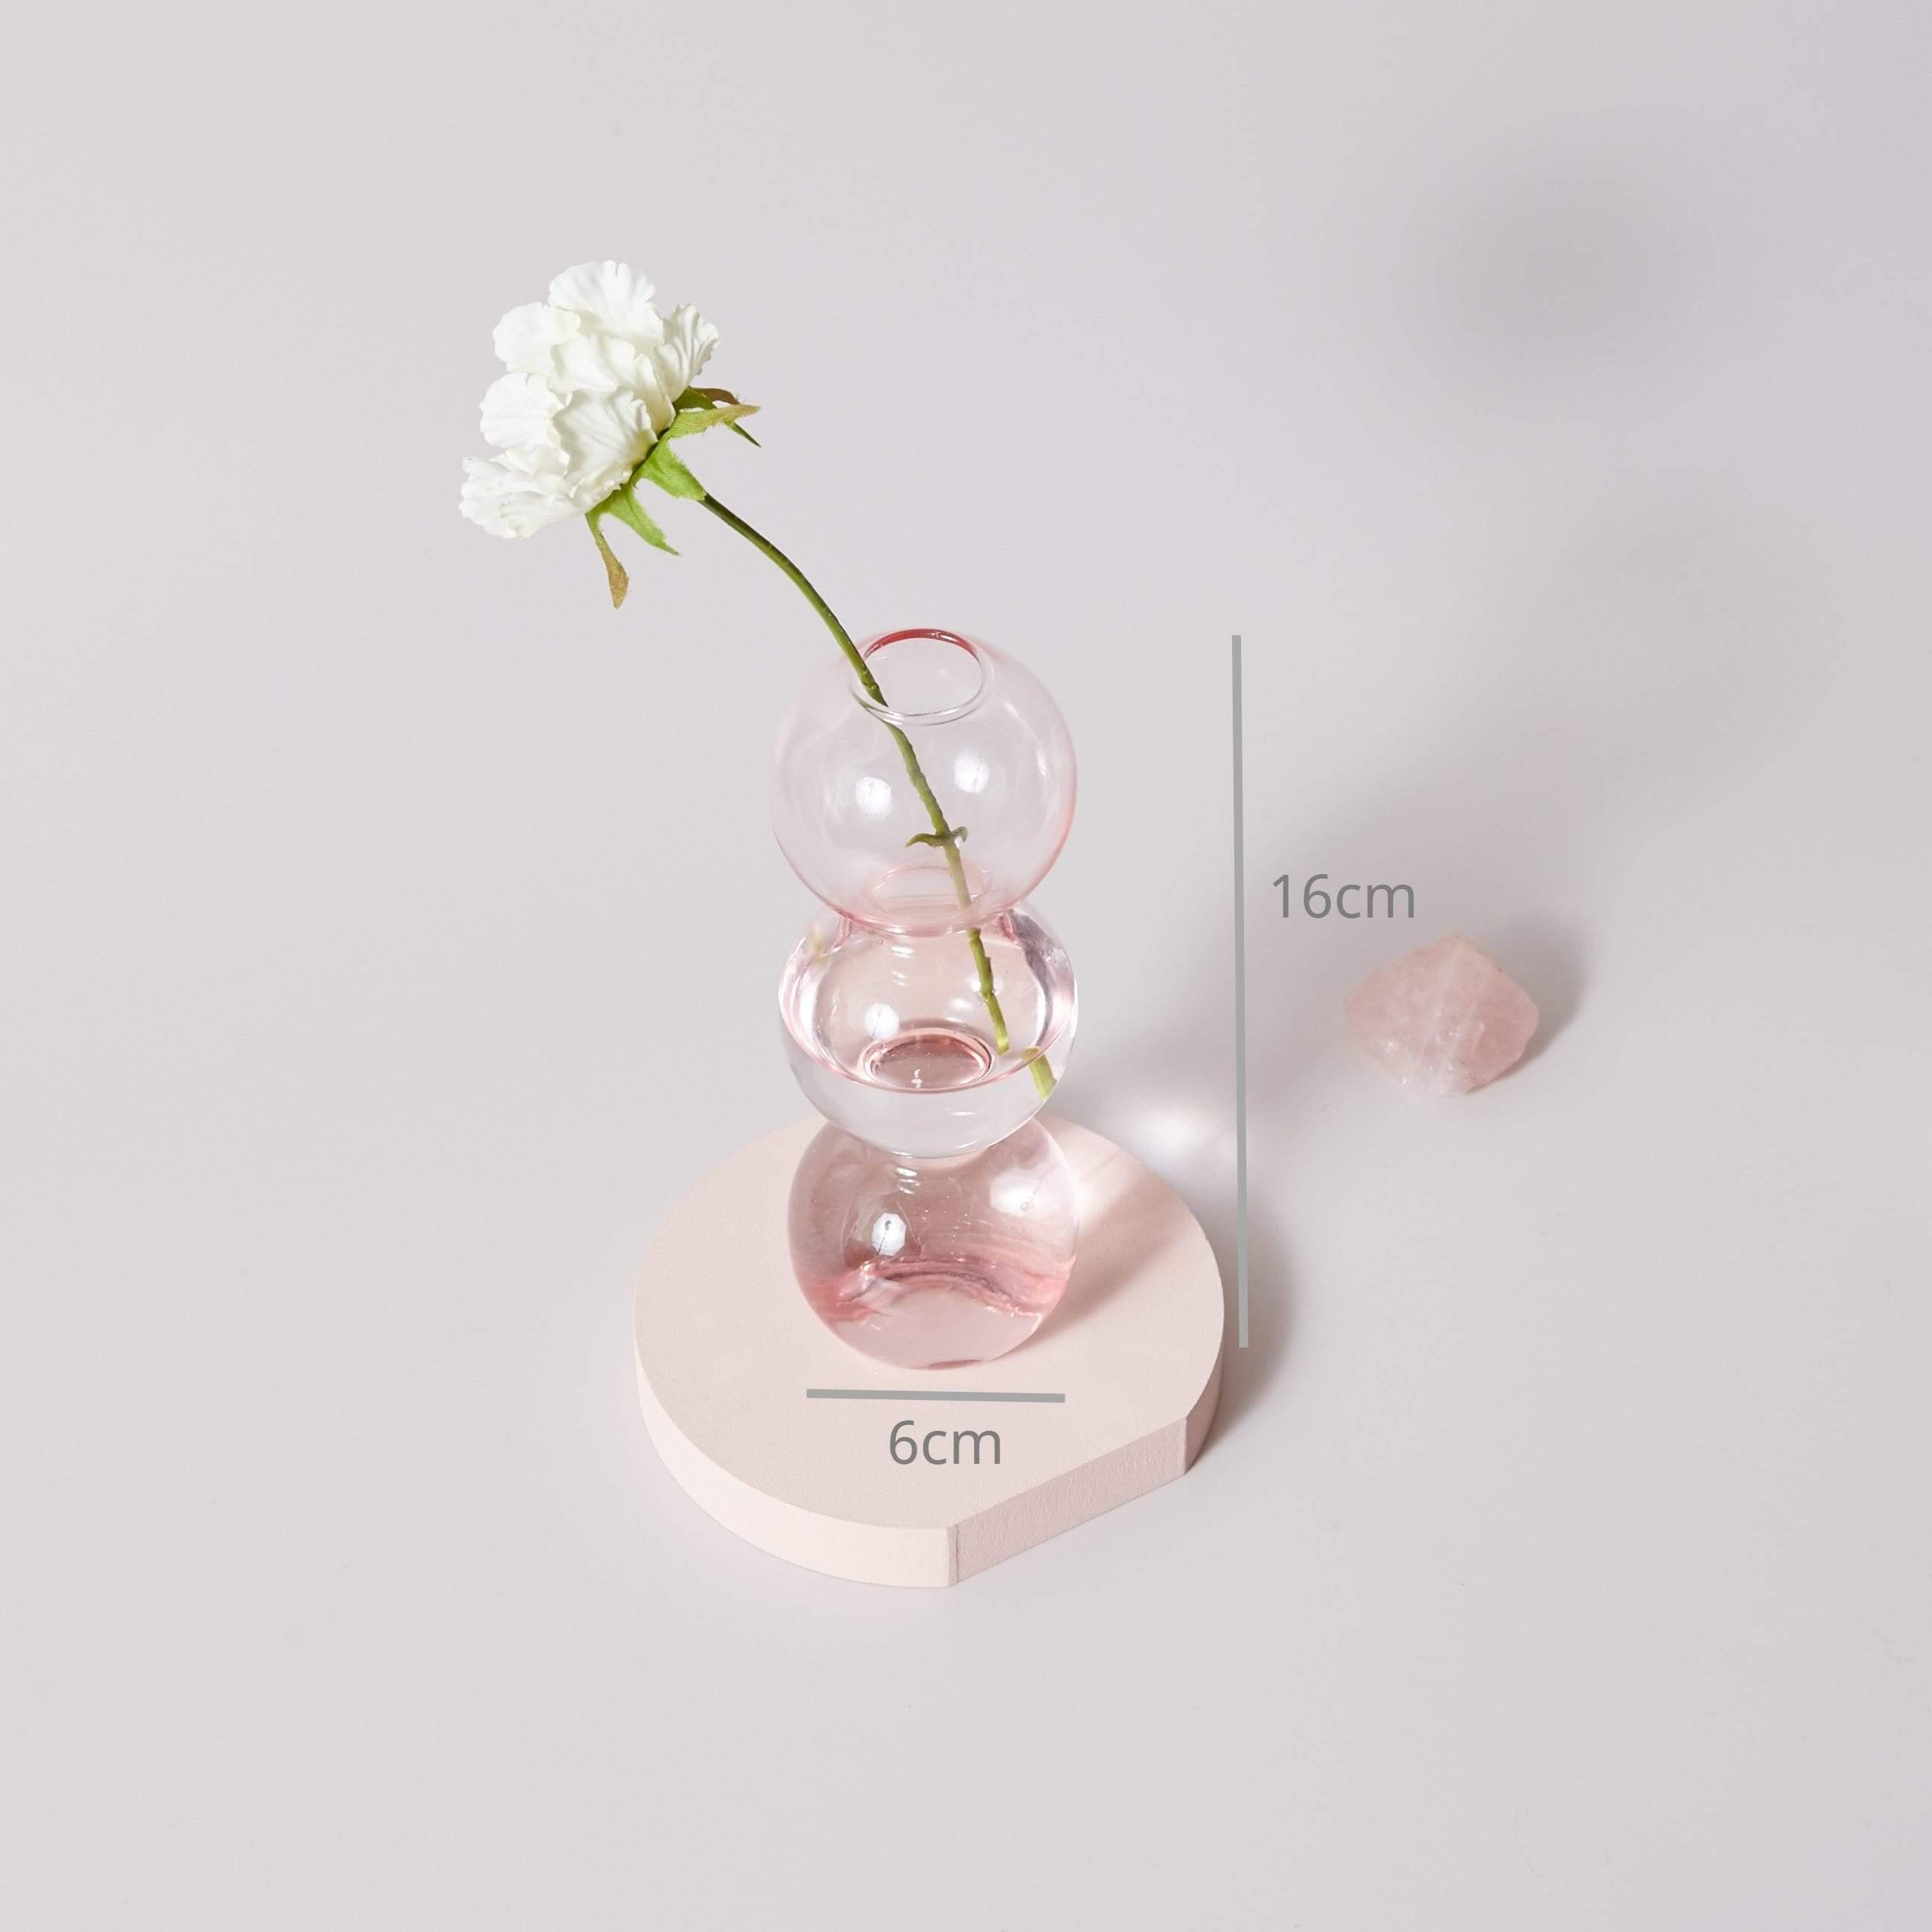 Shop 0 Pink s-bubble Pink Glass Candle Holder Taper Candlesticks Holder Wedding Table Centerpieces Nordic Home Decoration Mademoiselle Home Decor